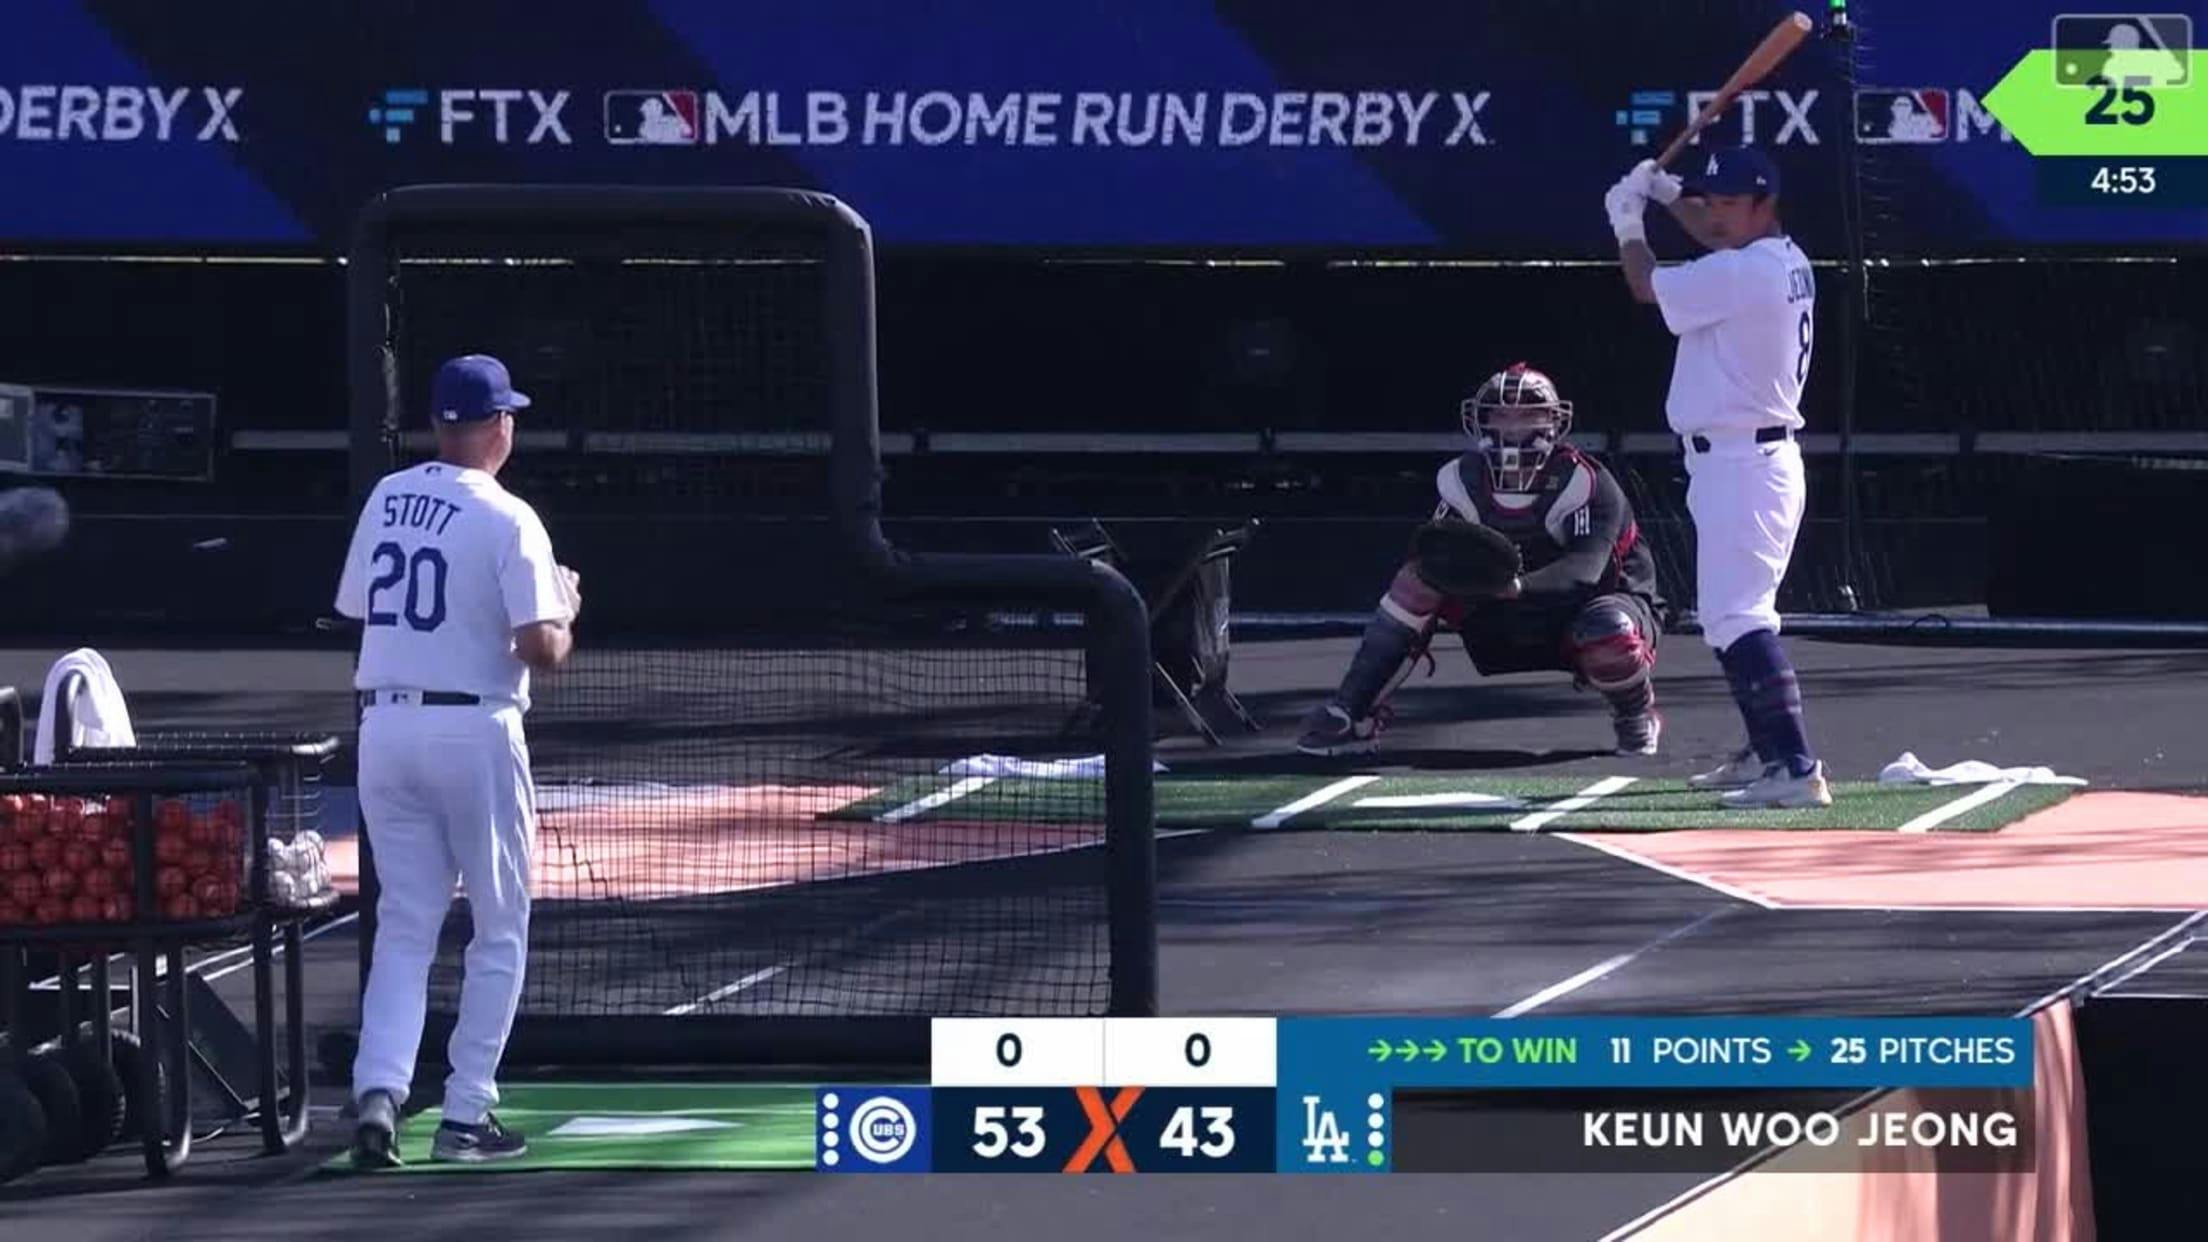 FOX Sports: MLB on X: That's a wrap on the 2021 Home Run Derby